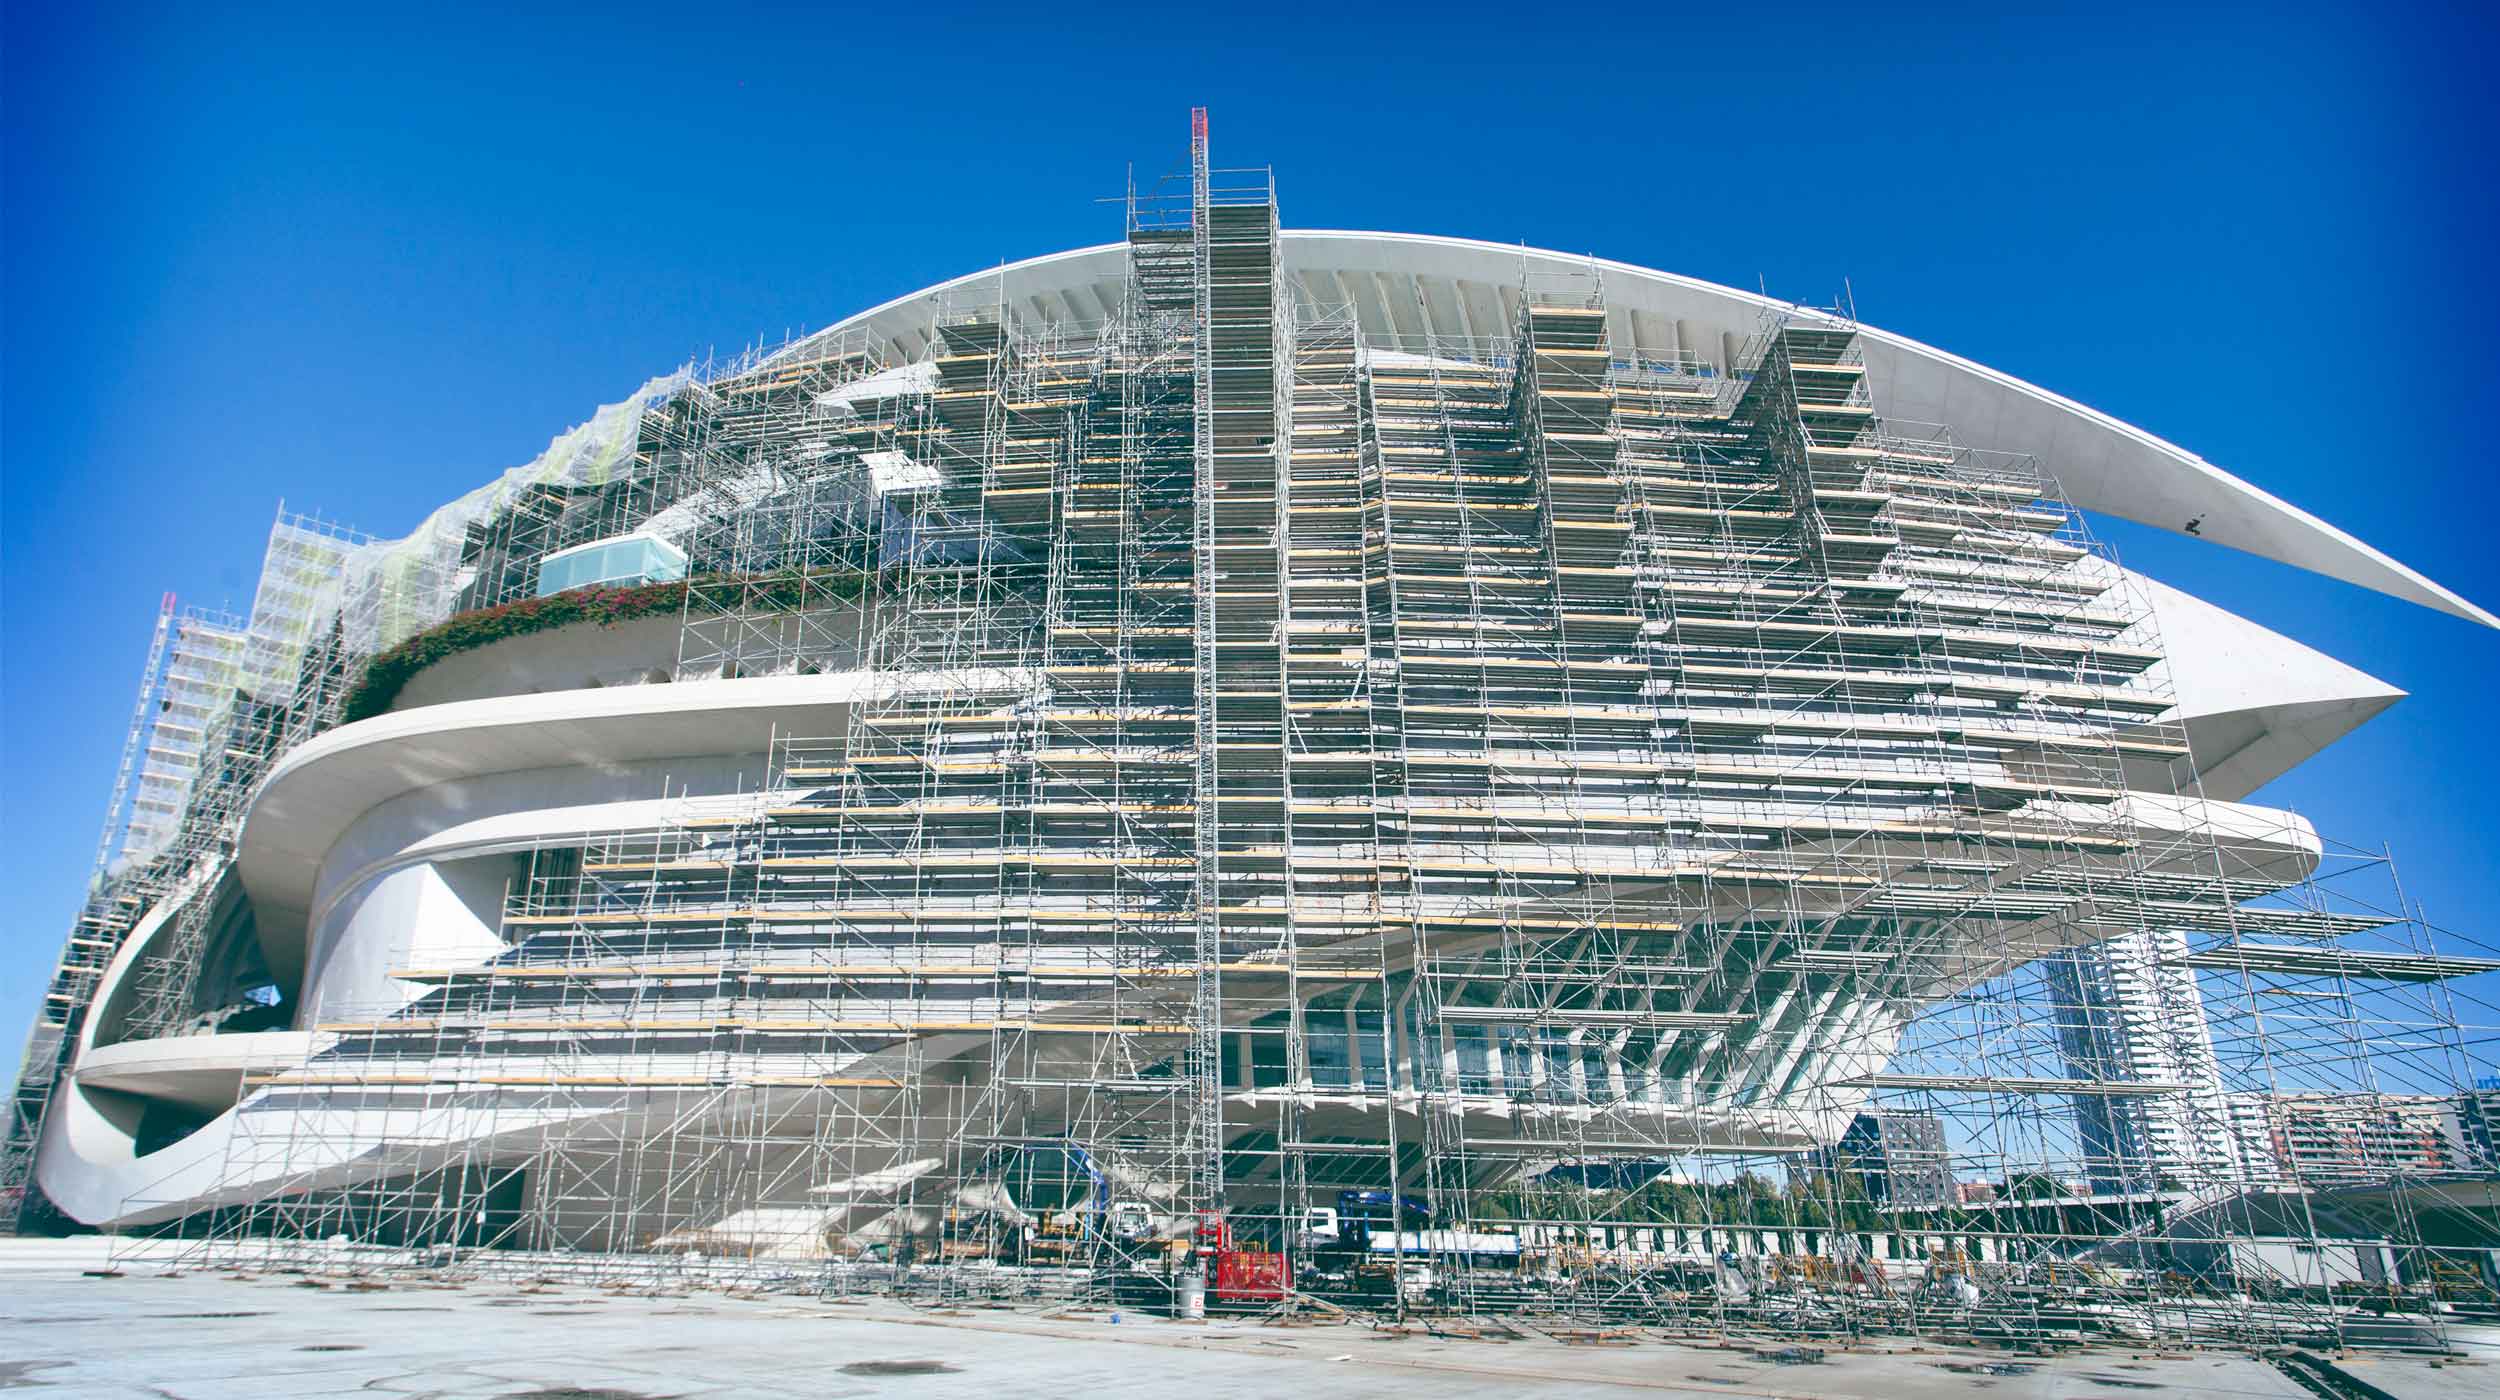 In order to cover the curved building surface, a total of 48,000 m³ of scaffolding was used, comprising 12,000 m² of façade scaffolding set in consecutive flights